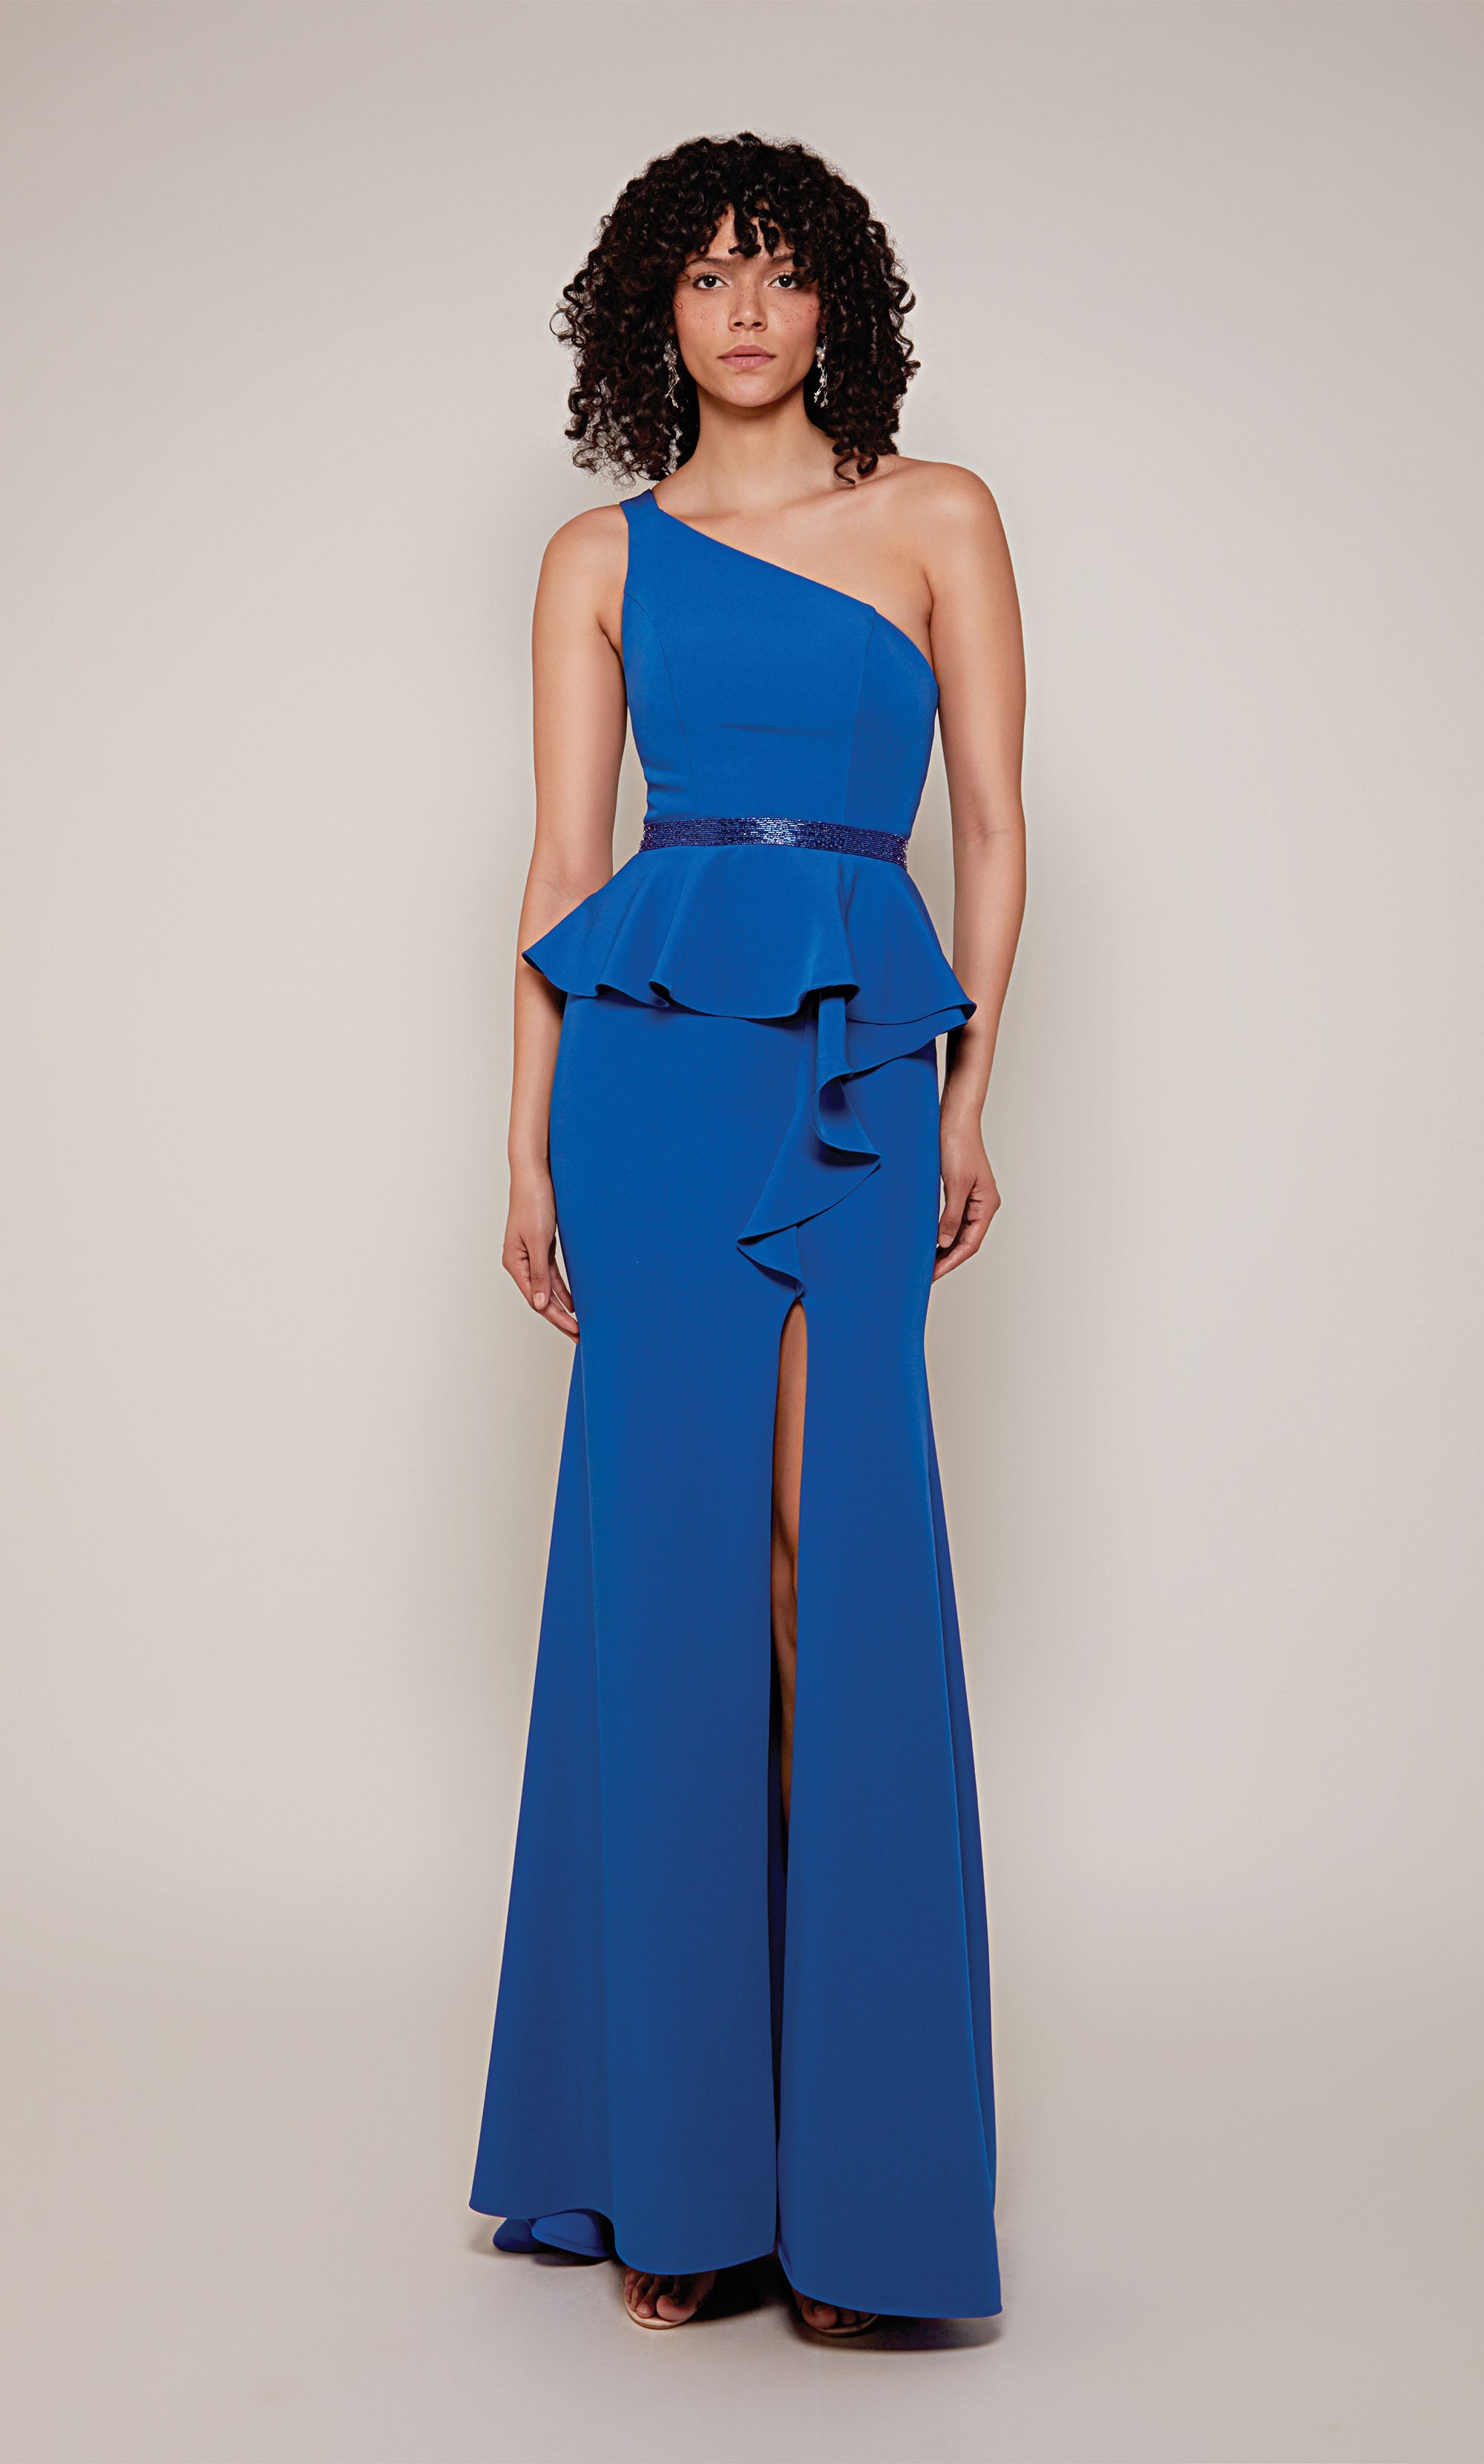 A royal blue, one shoulder mother of the bride dress with a faux beaded belt, peplum bodice, side ruffle, and side slit.